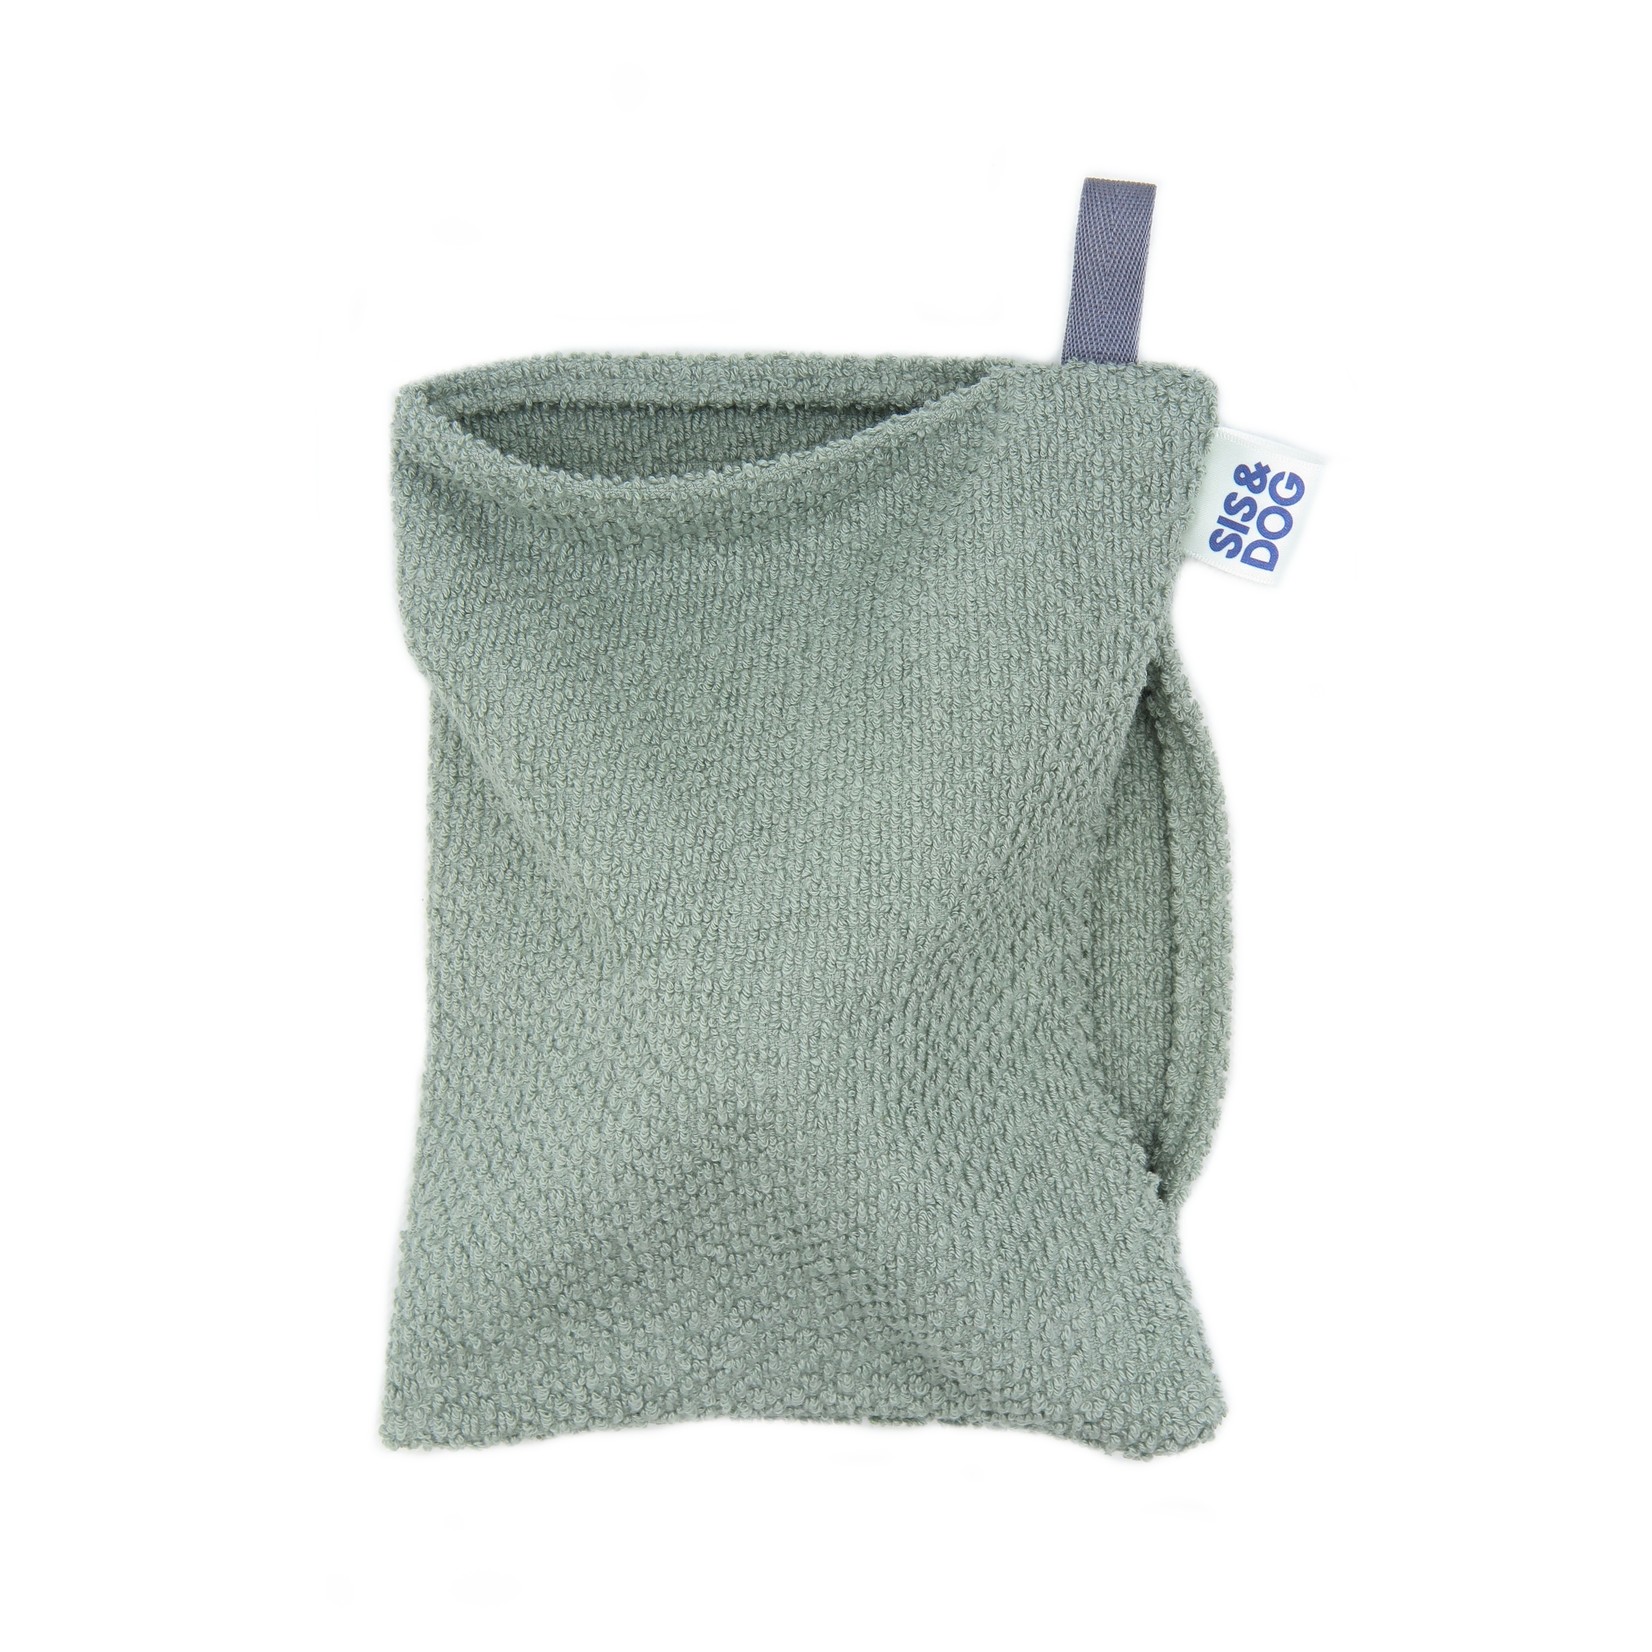 Paw towel old green